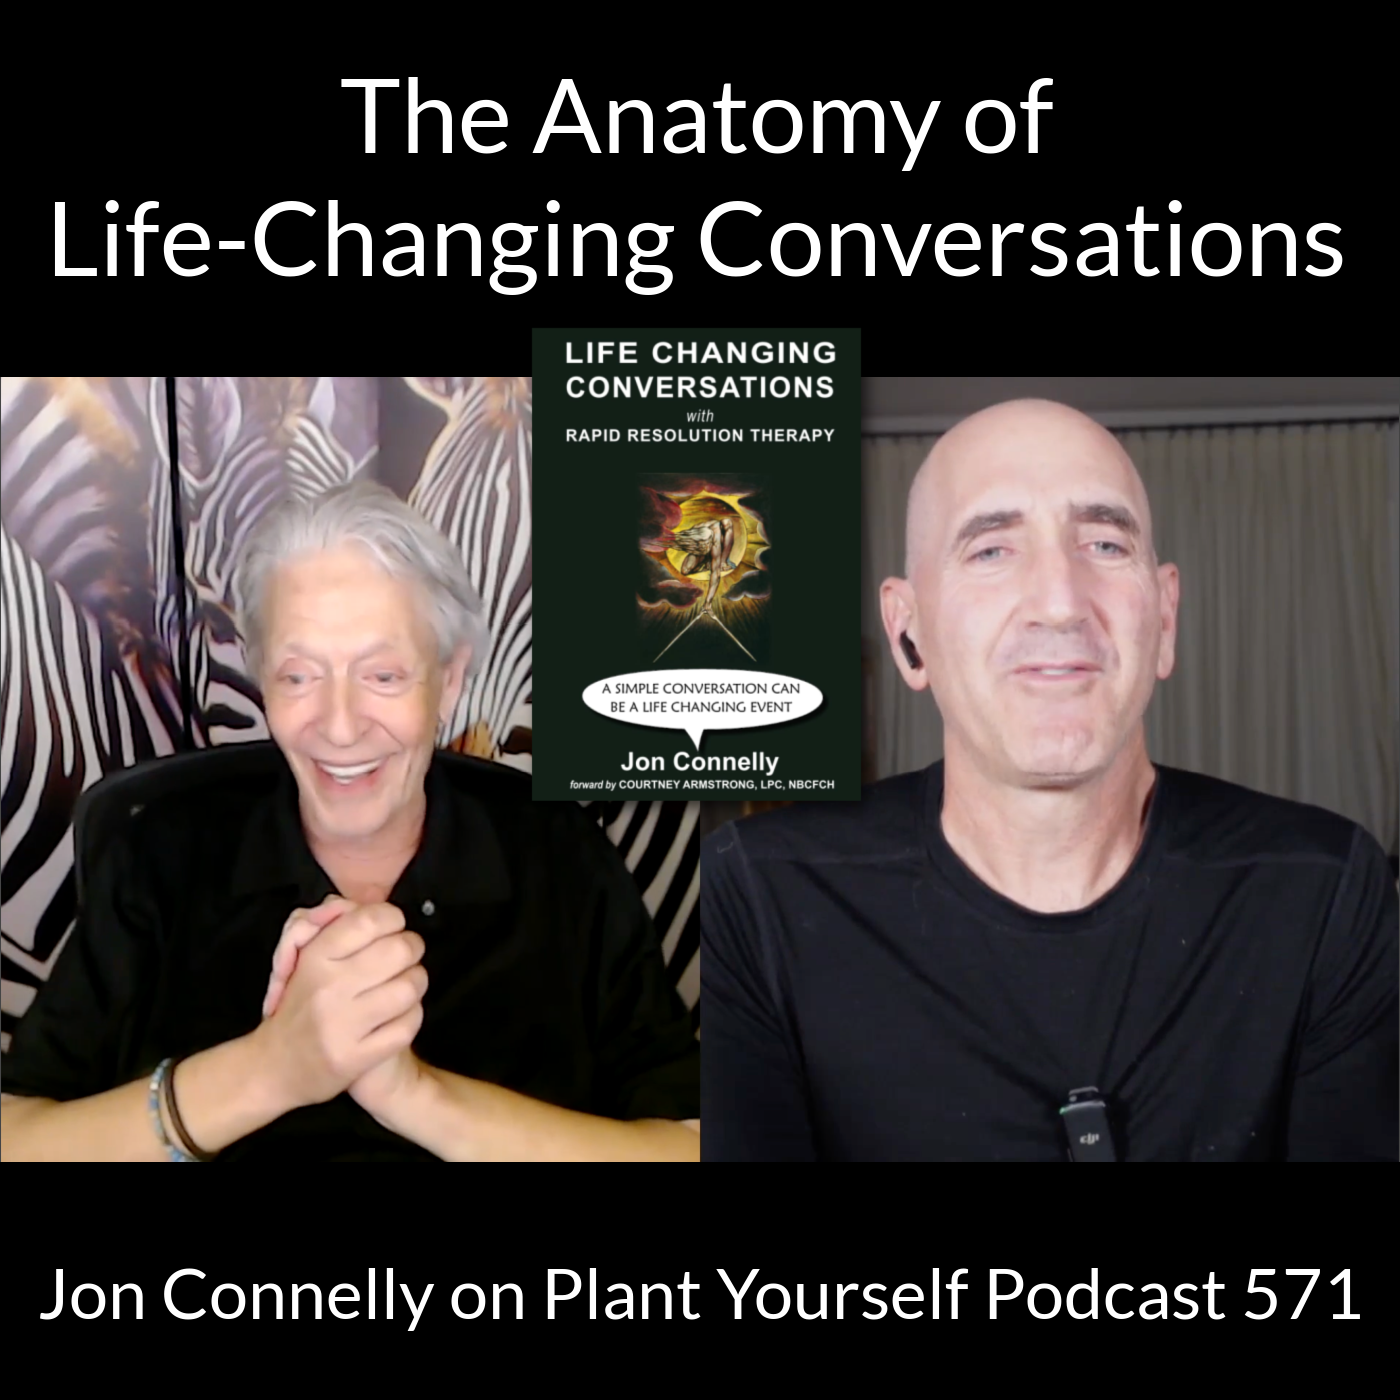 The Anatomy of Life-Changing Conversations: Jon Connelly on PYP 571